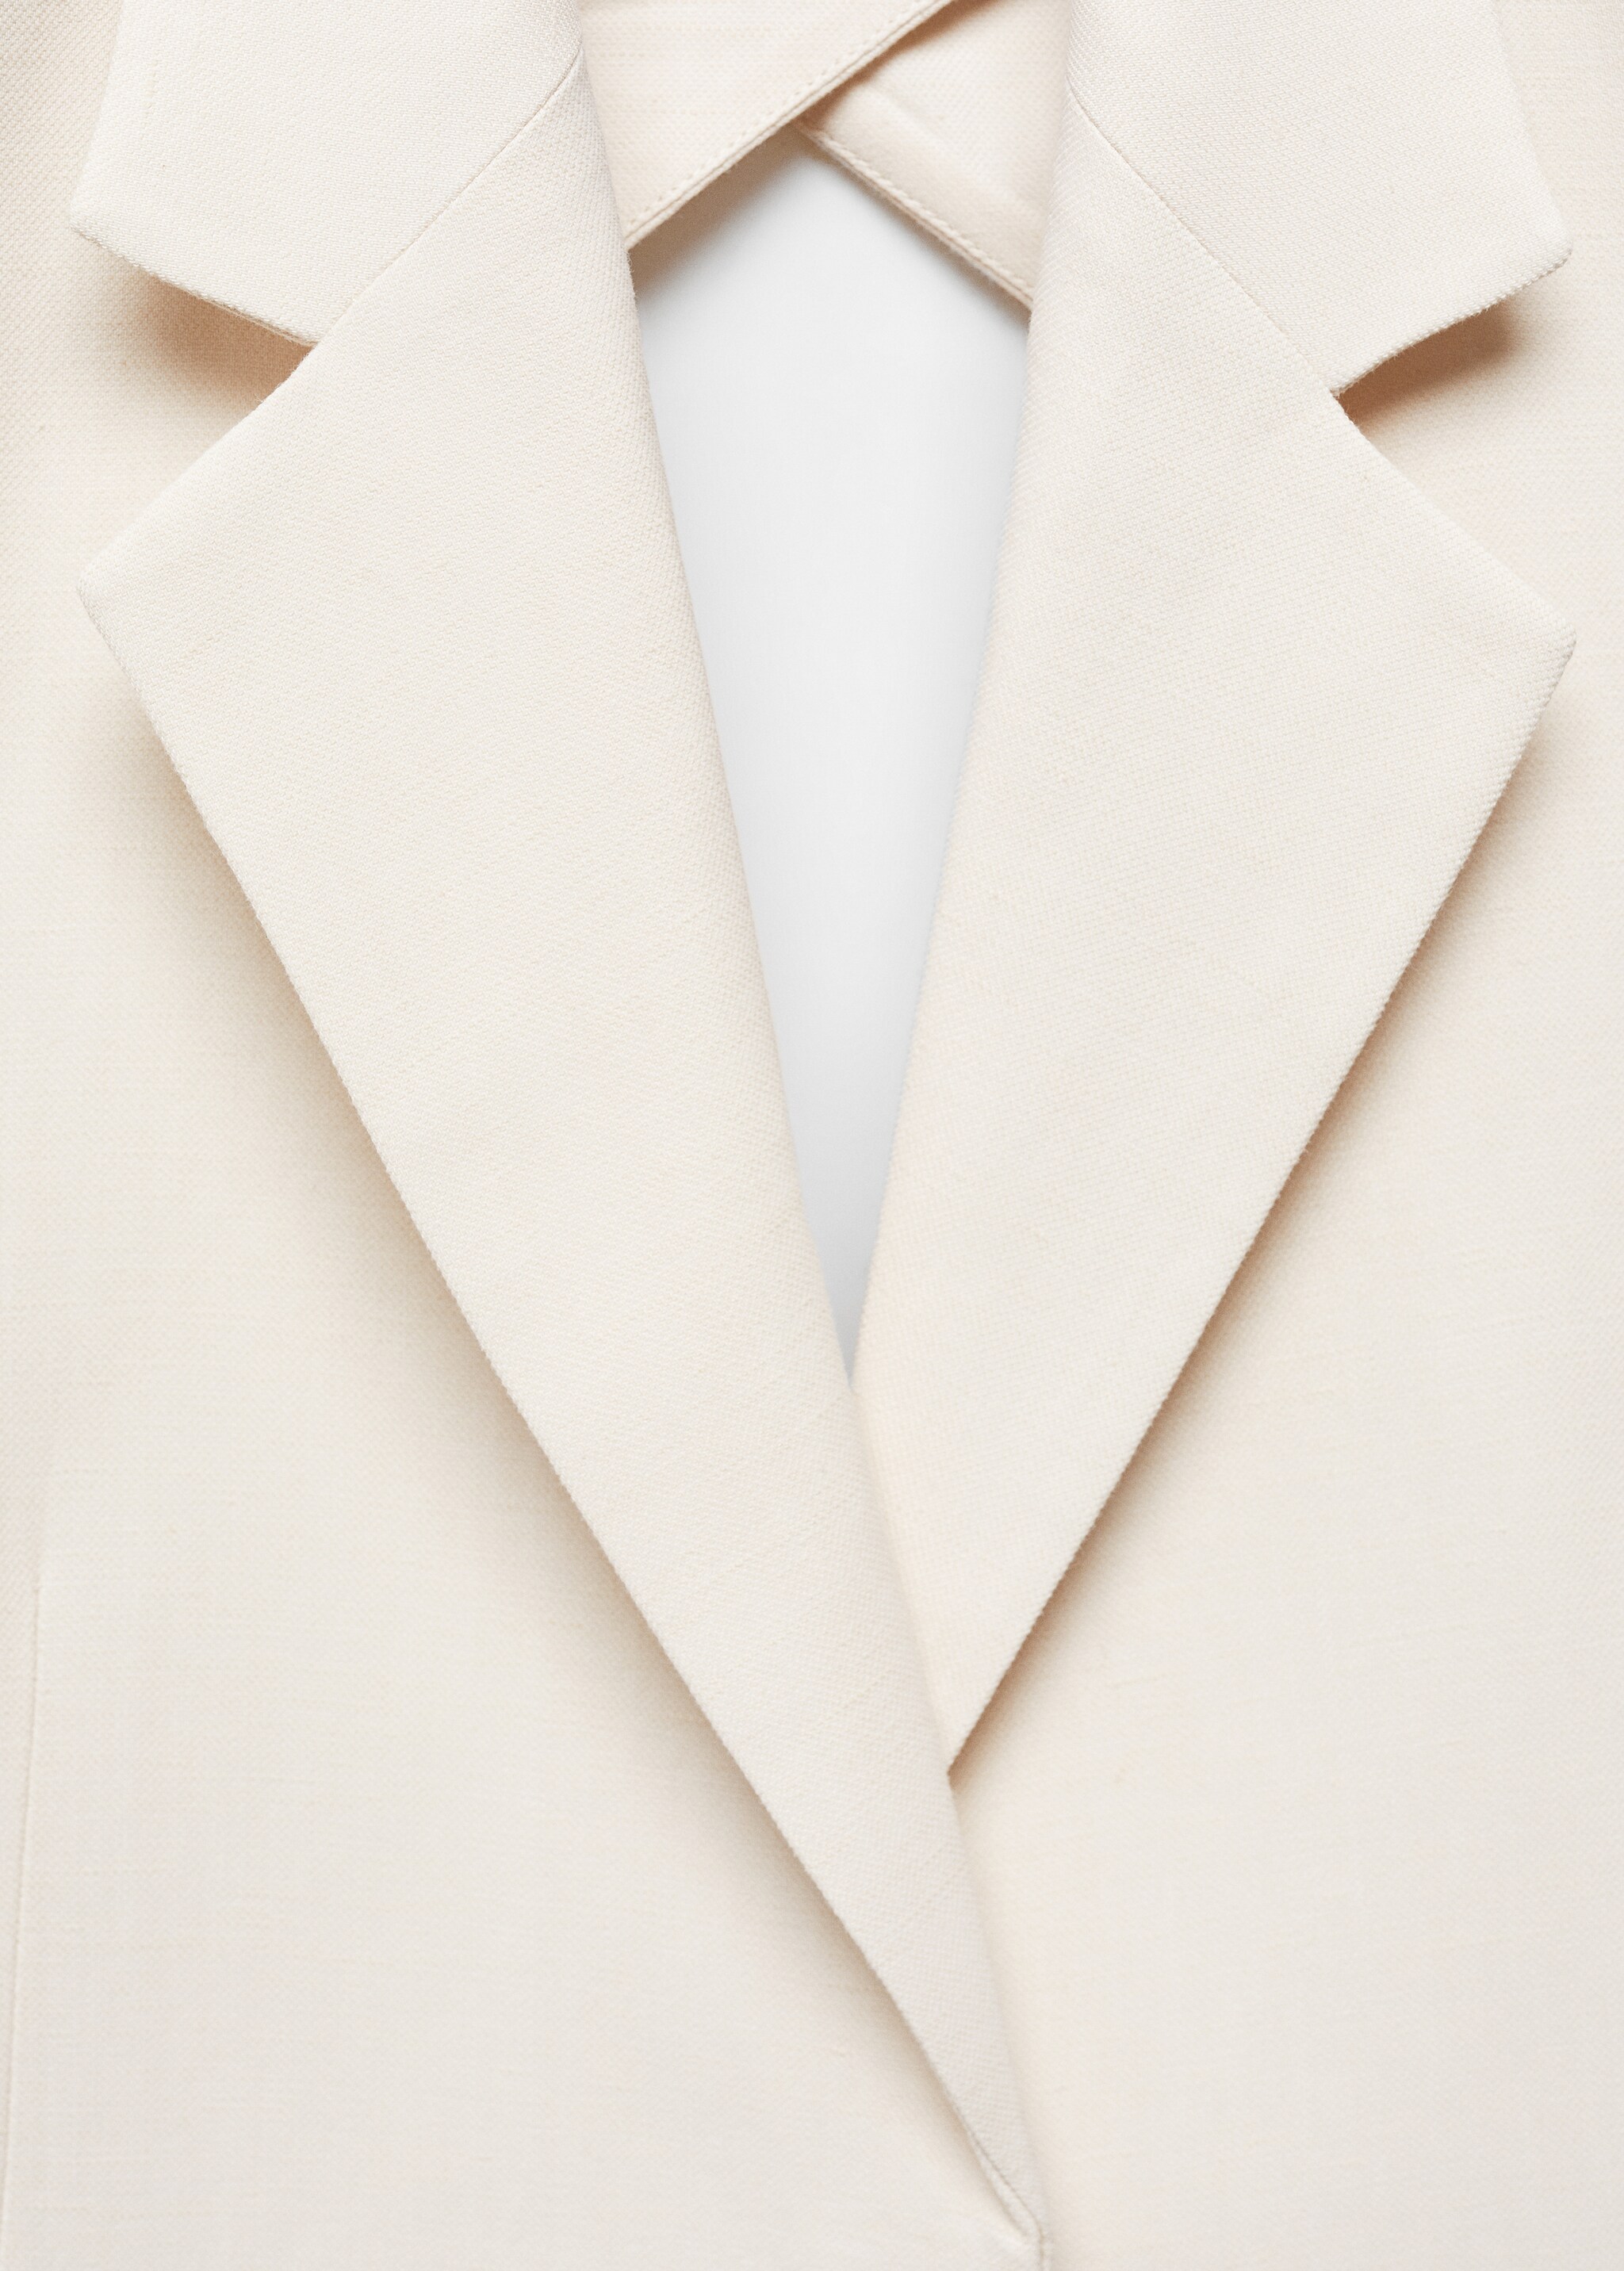 Suit waistcoat with open back - Details of the article 8